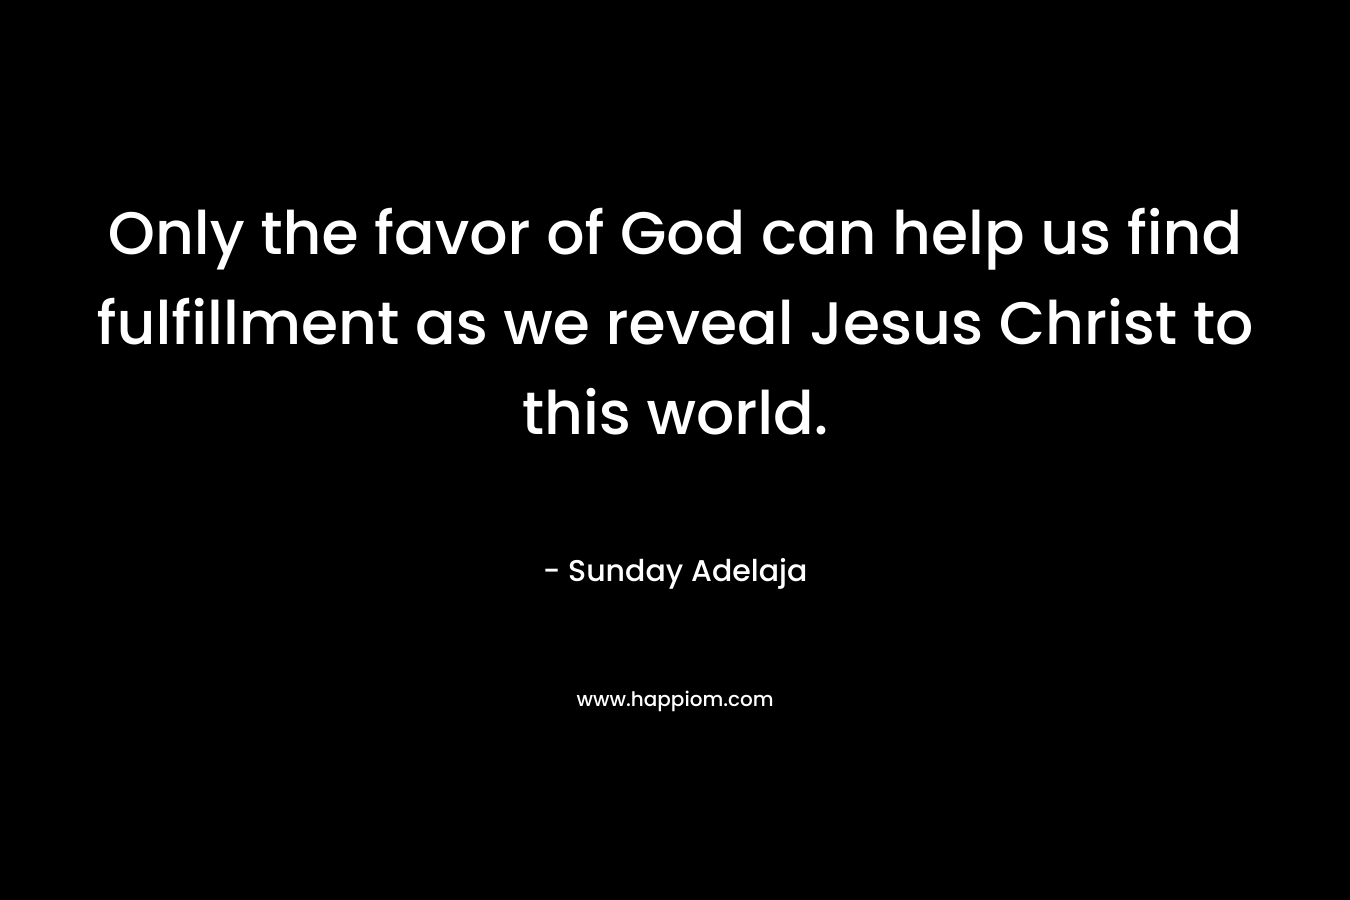 Only the favor of God can help us find fulfillment as we reveal Jesus Christ to this world. – Sunday Adelaja